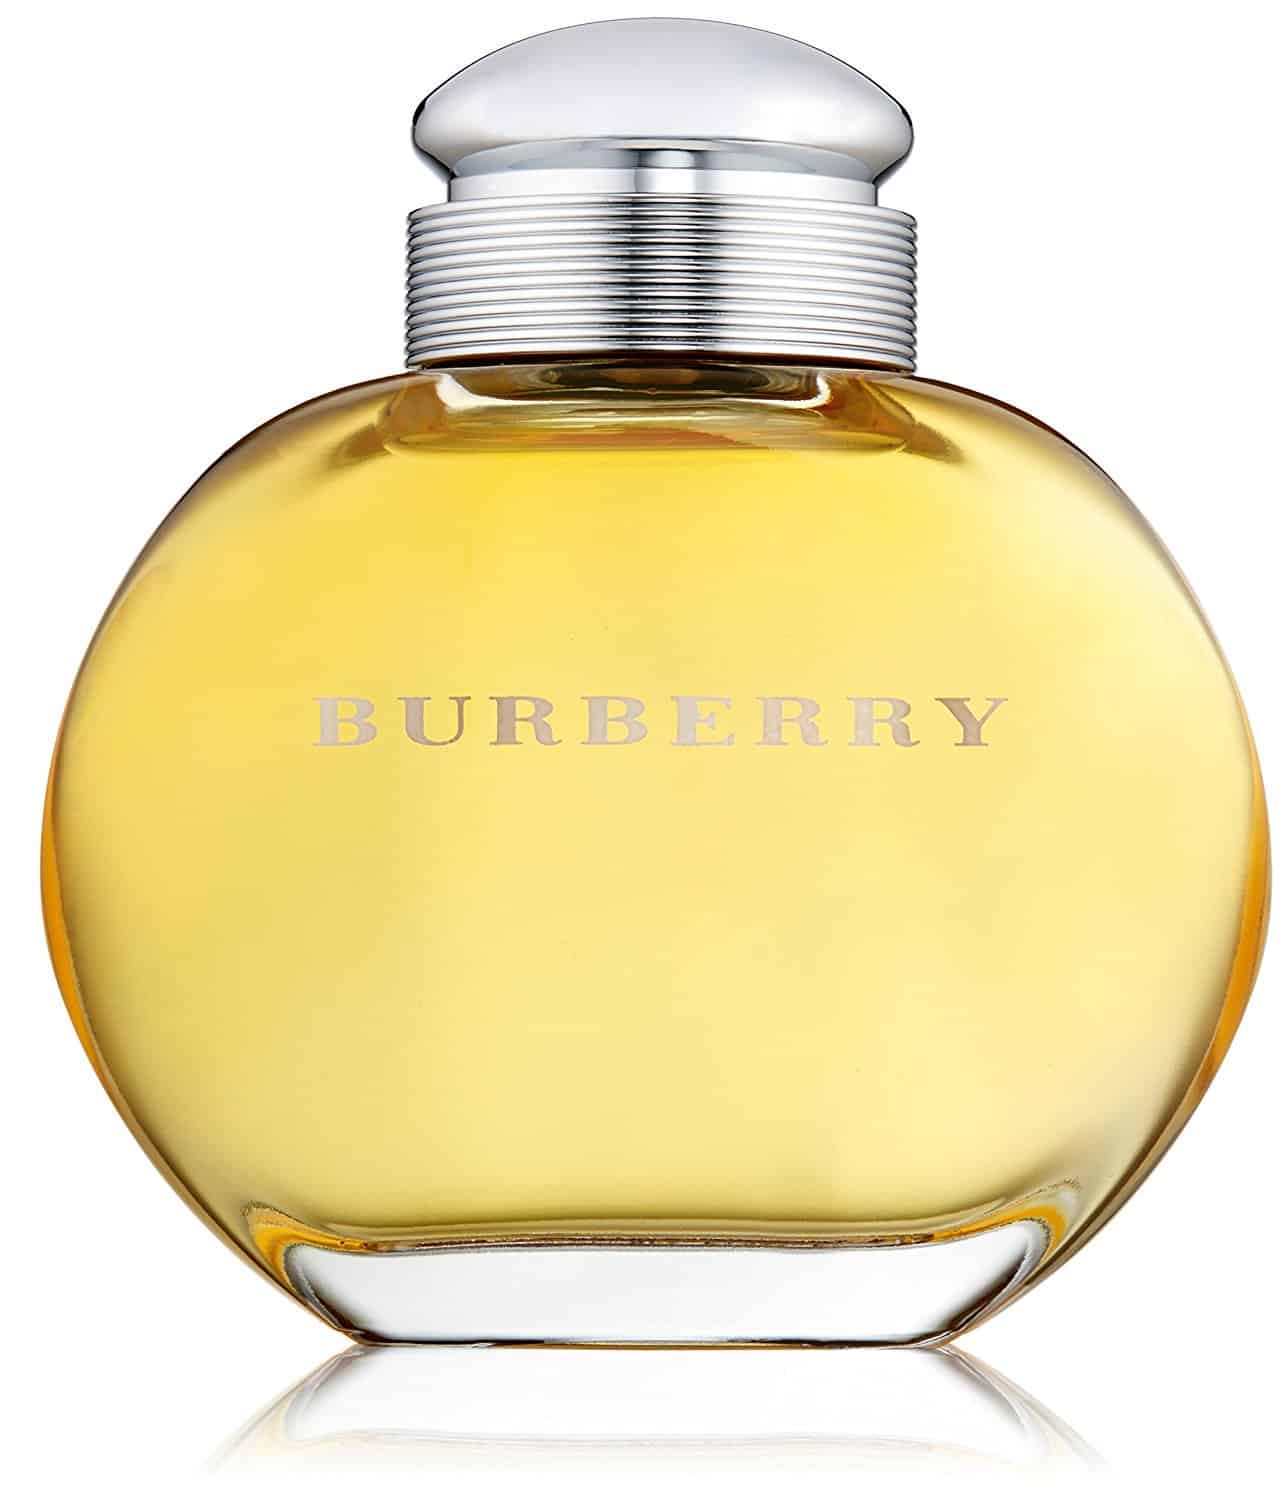 Top 10 Most Seductive Perfumes for Women in 2020